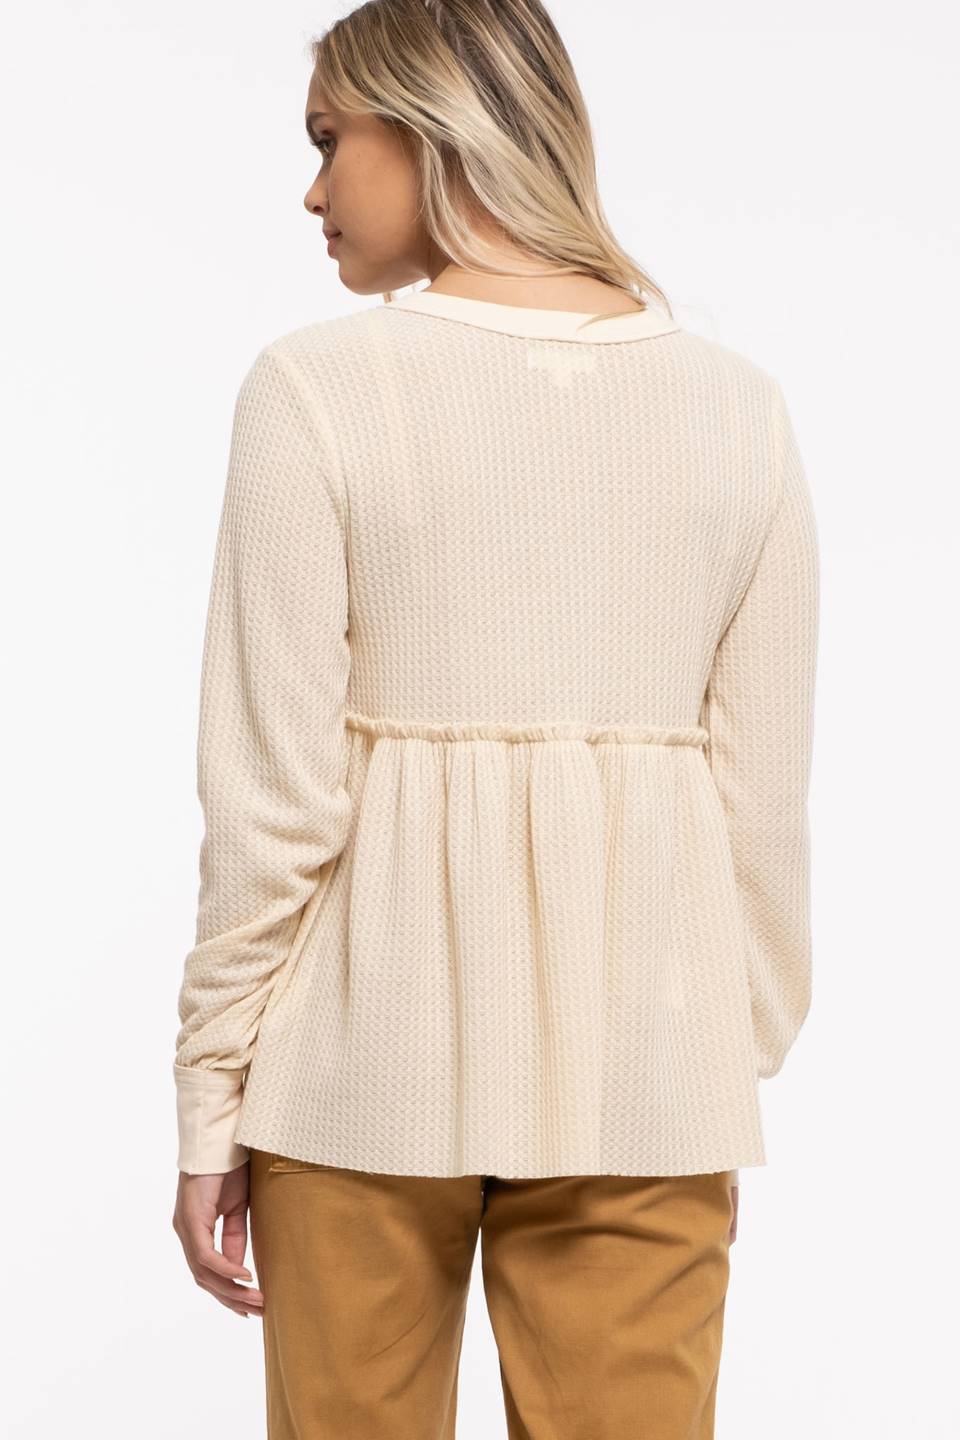 Oatmeal Baby Doll Knit Top